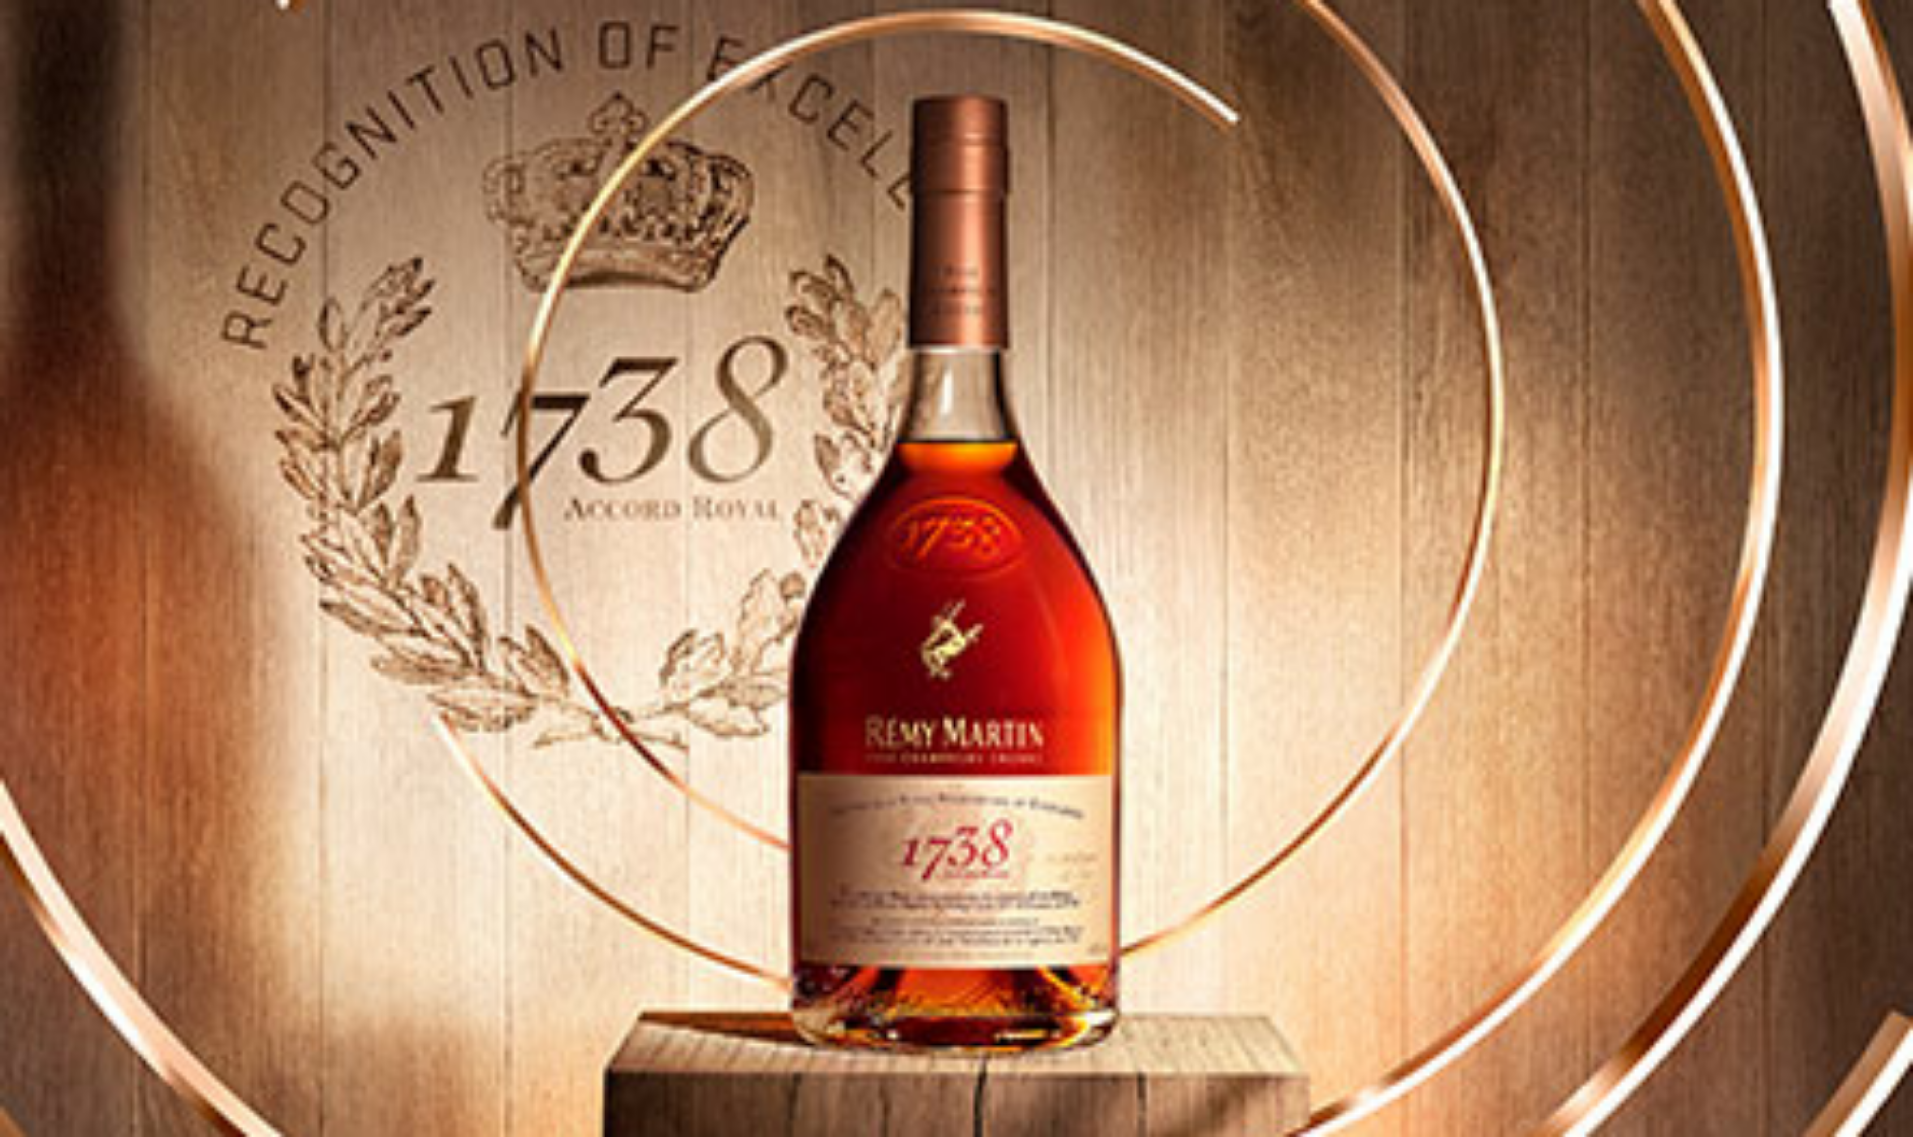 Launch of Remy Martin 1738 Accord Royal